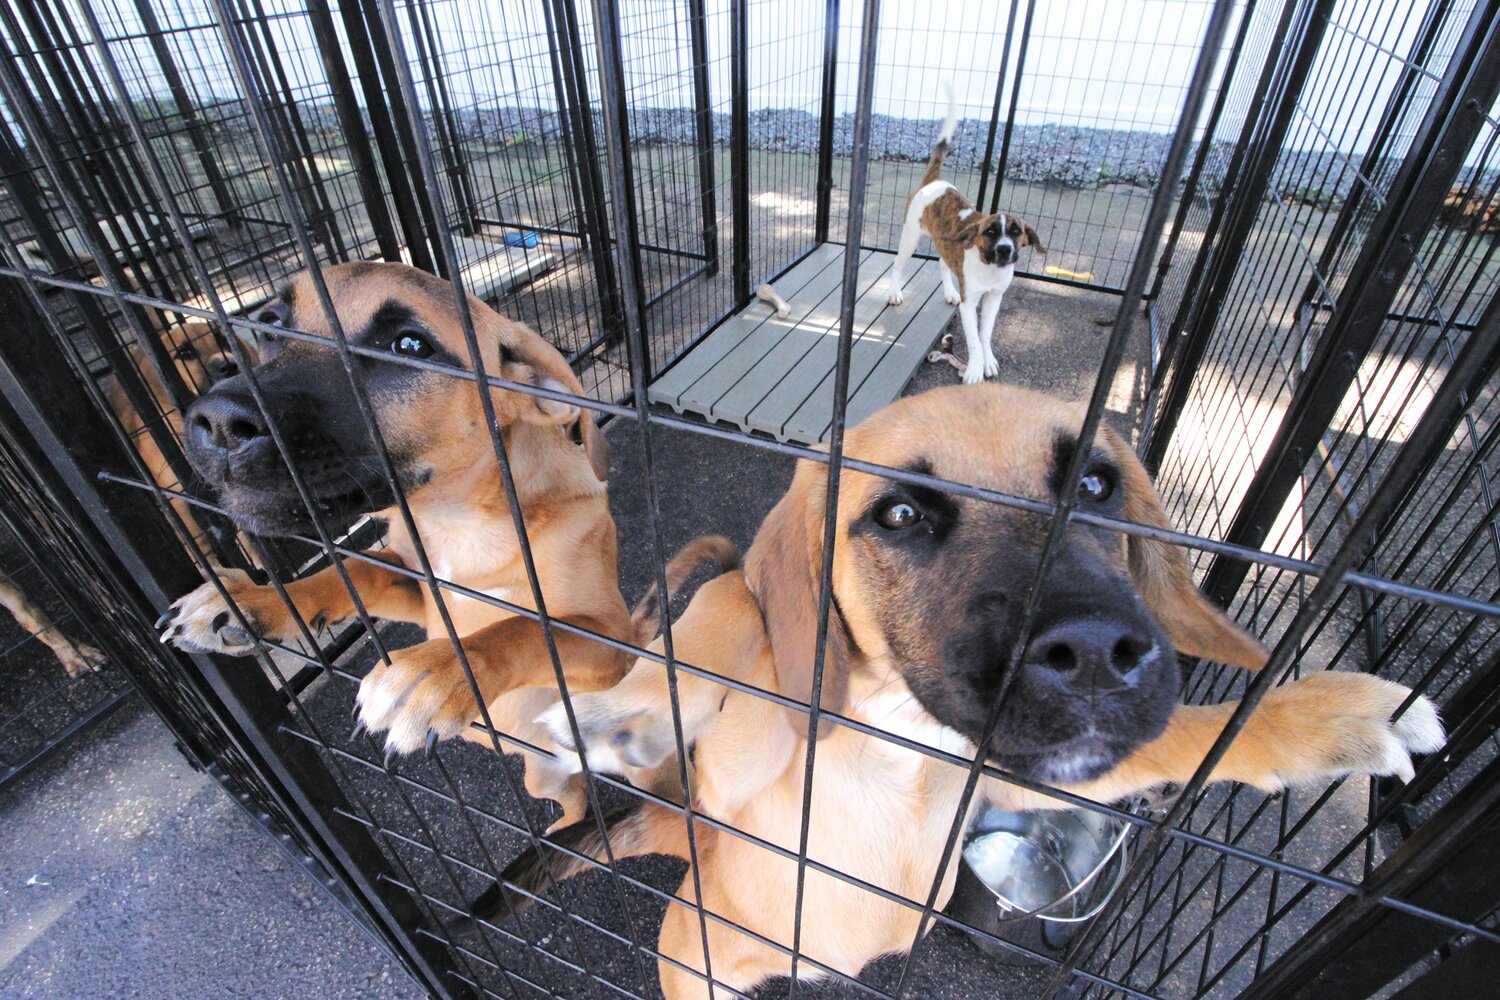 PUPPIES AND MORE PUPPIES: Animal rescues are faced with litters from dogs that have been rescued from southern states that are adding stress to facilities and their staffs. (Warwick Beacon photos)